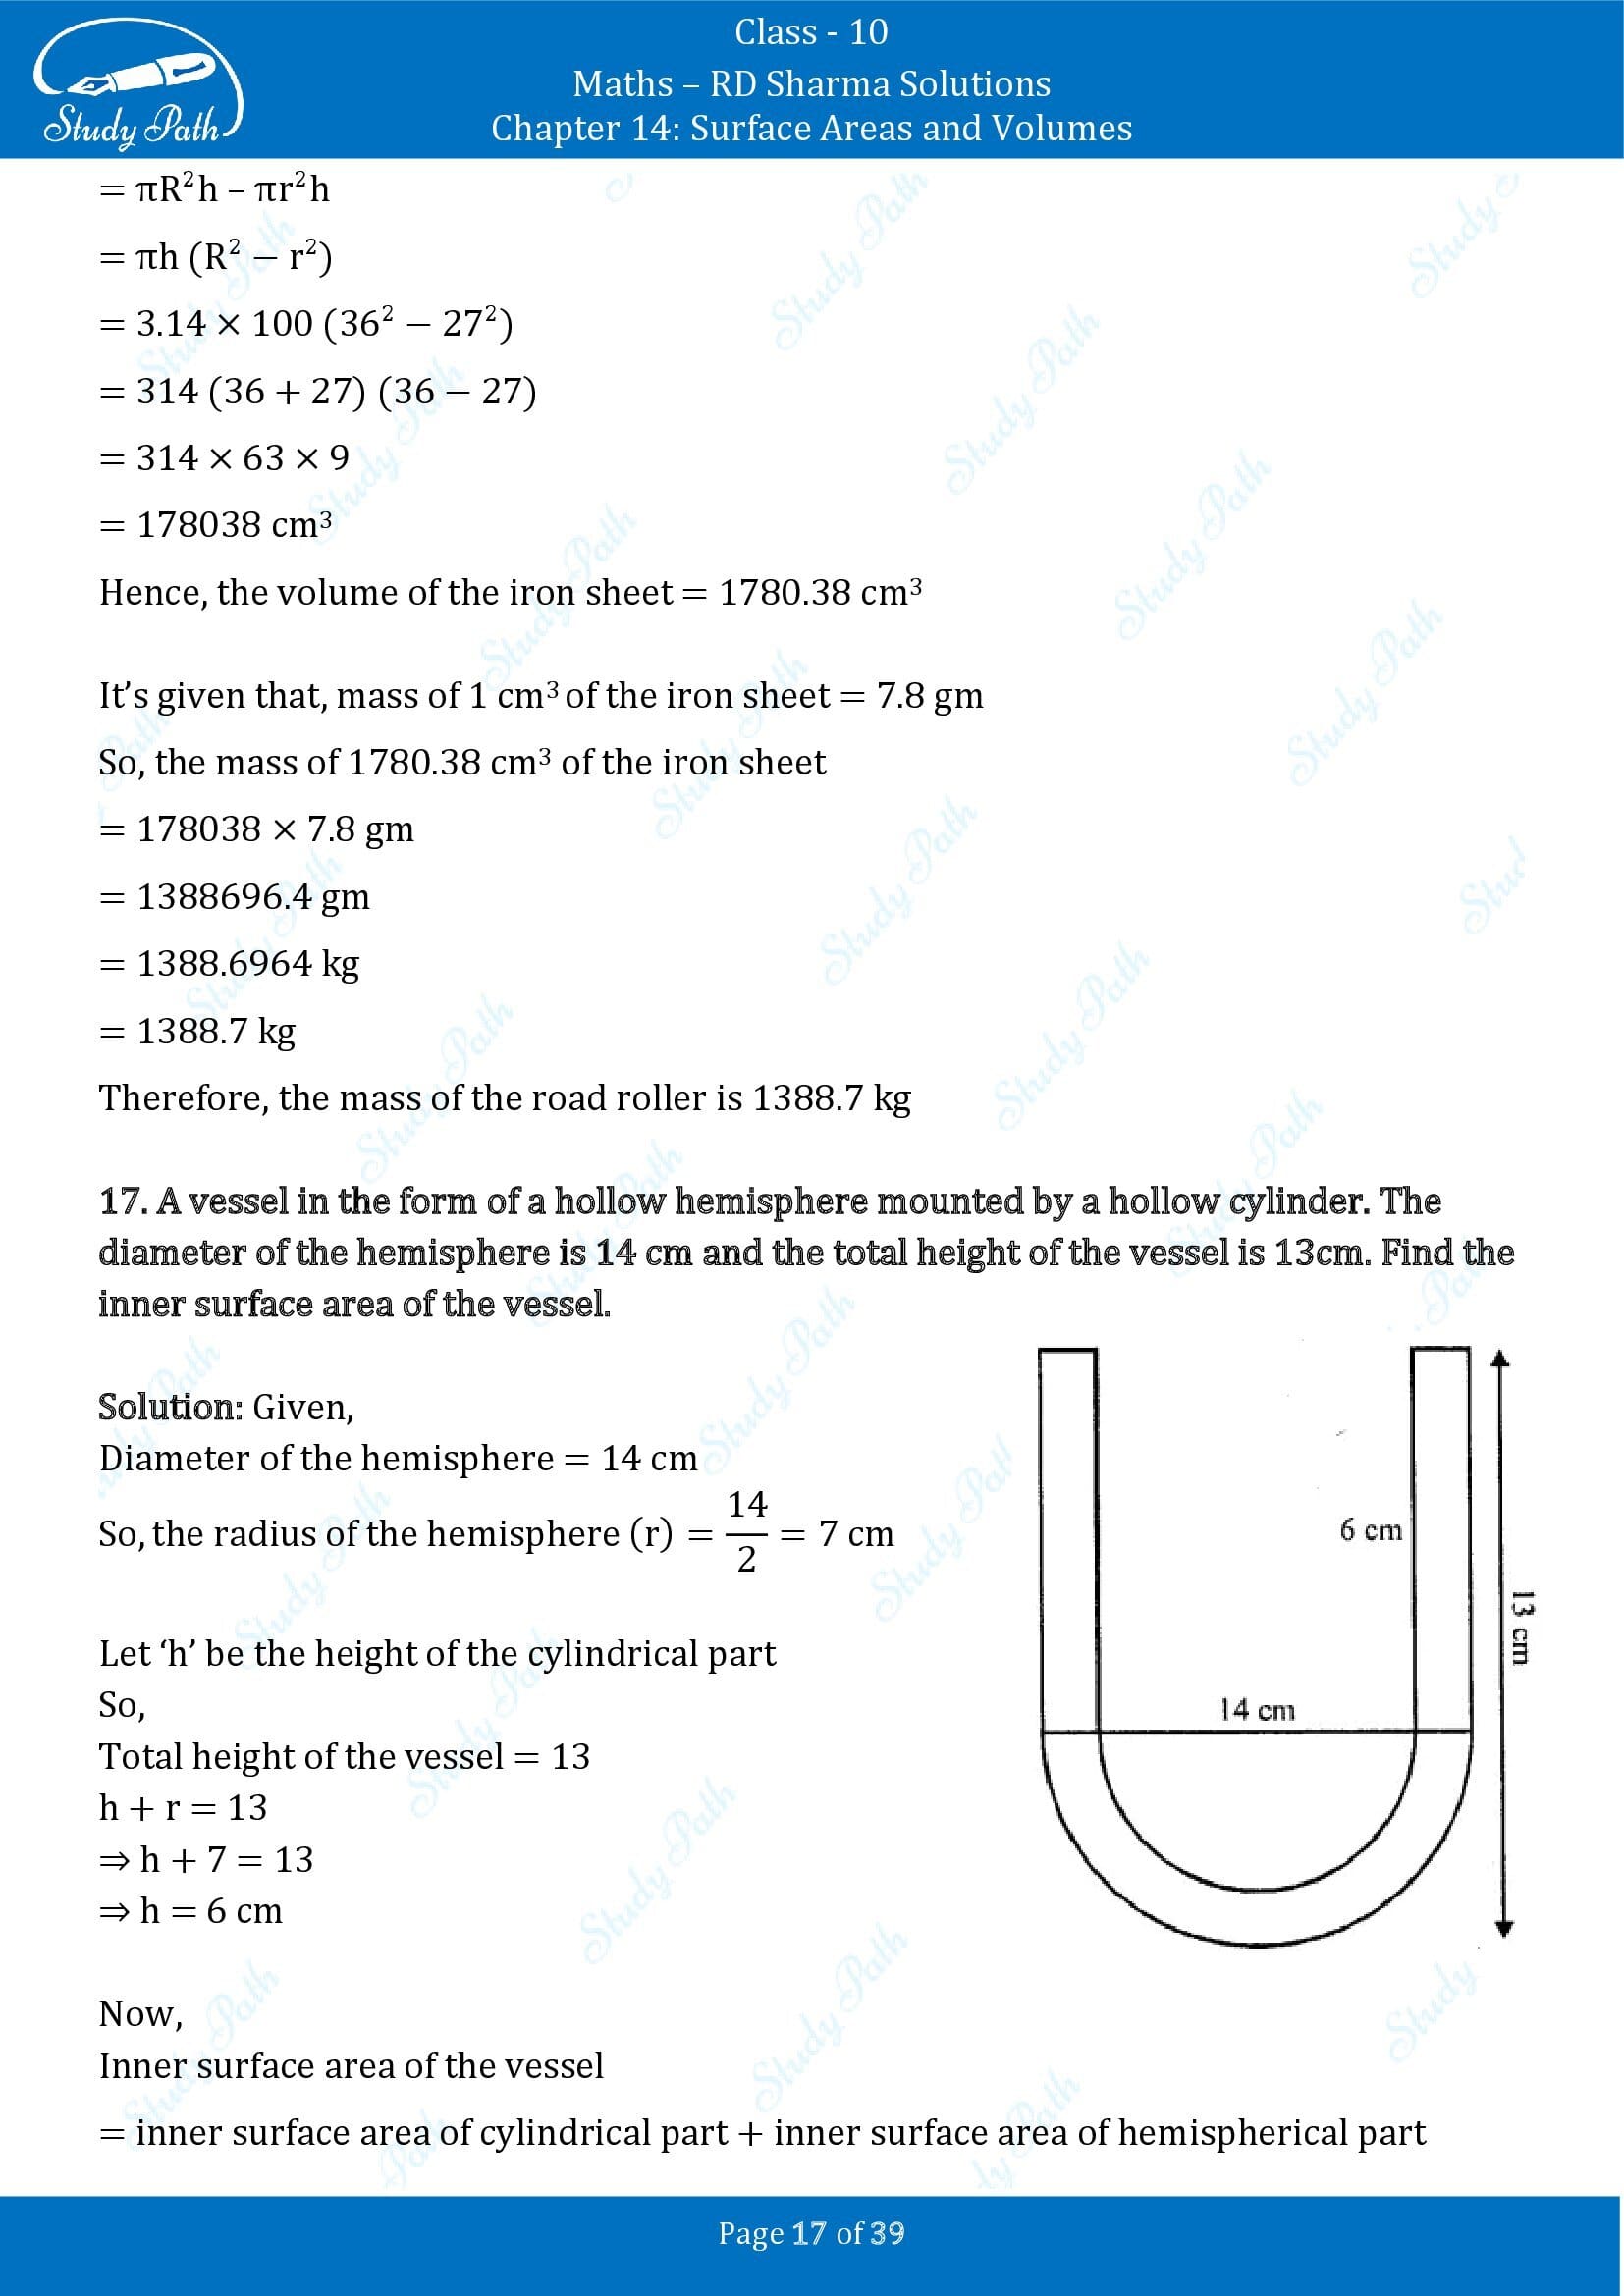 RD Sharma Solutions Class 10 Chapter 14 Surface Areas and Volumes Exercise 14.2 00017